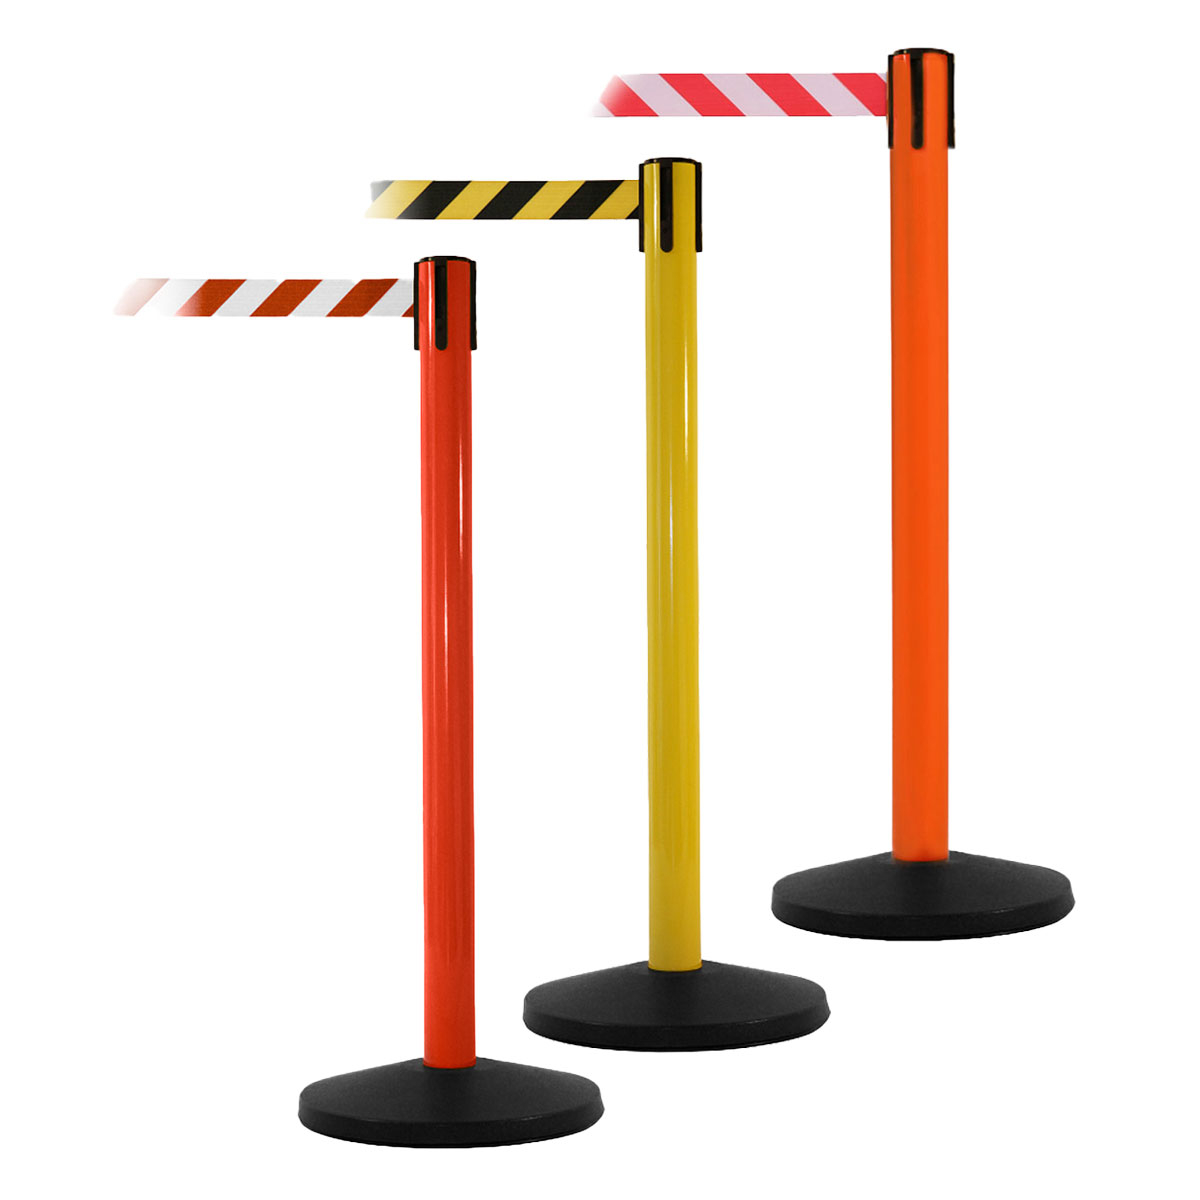 SafetyMaster Retractable Safety Barriers